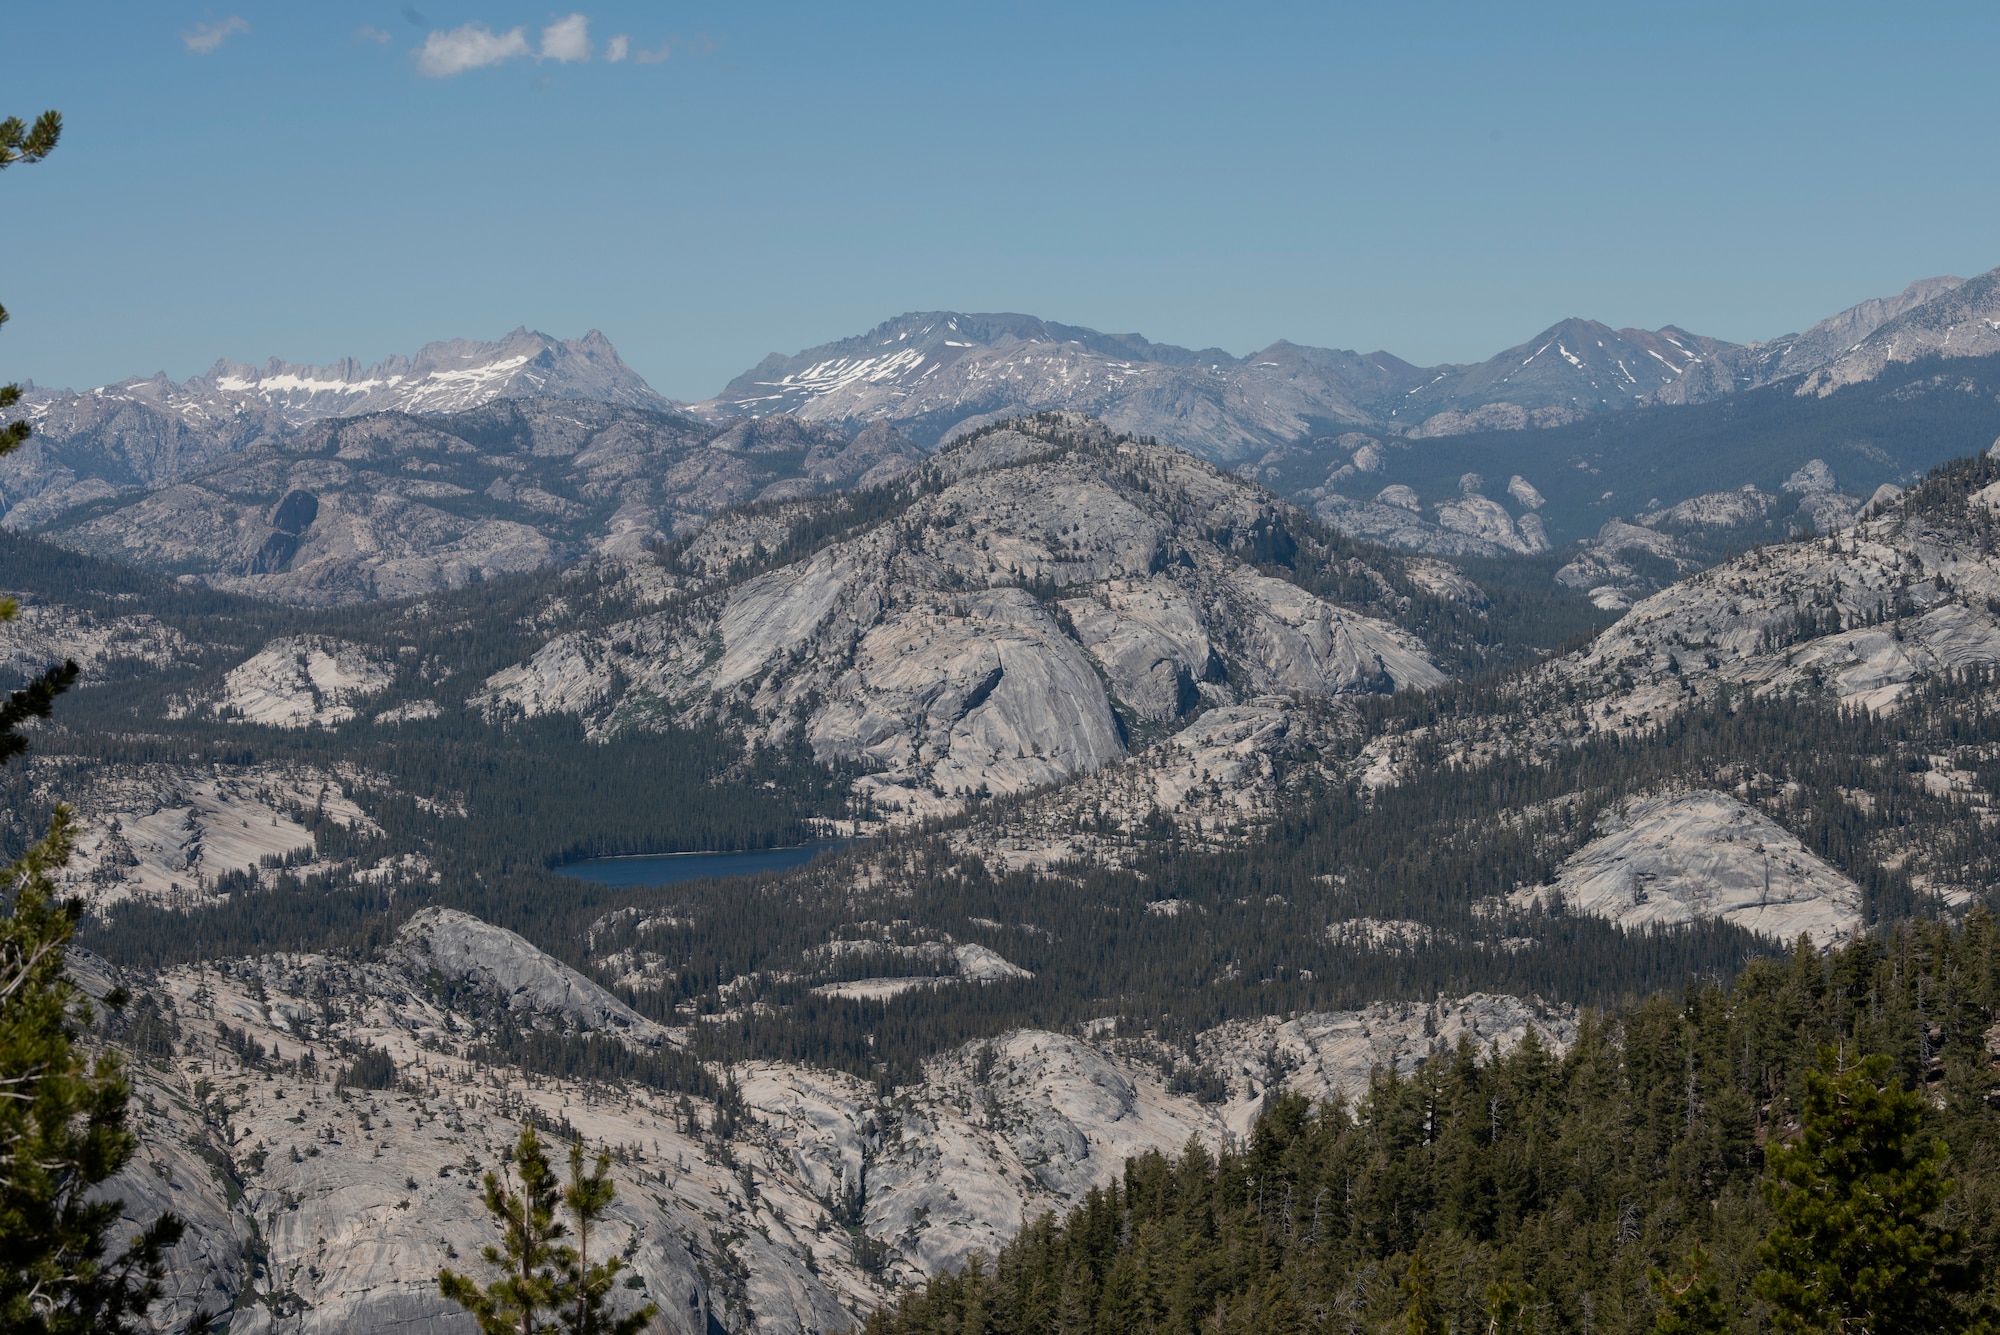 Several peaks and valleys are visible along the route of the trail leading to Cloud’s Rest July 13, 2019, at Yosemite National Park, California. Nearly four dozen Airmen from Travis Air Force Base, California, hiked to Cloud’s Rest covering 14.57 miles as they climbed to 9,926 feet above sea level. The hike was organized to enhance the Airmen’s physical, mental and spiritual resiliency. (U.S. Air Fore photo by Tech. Sgt. James Hodgman)